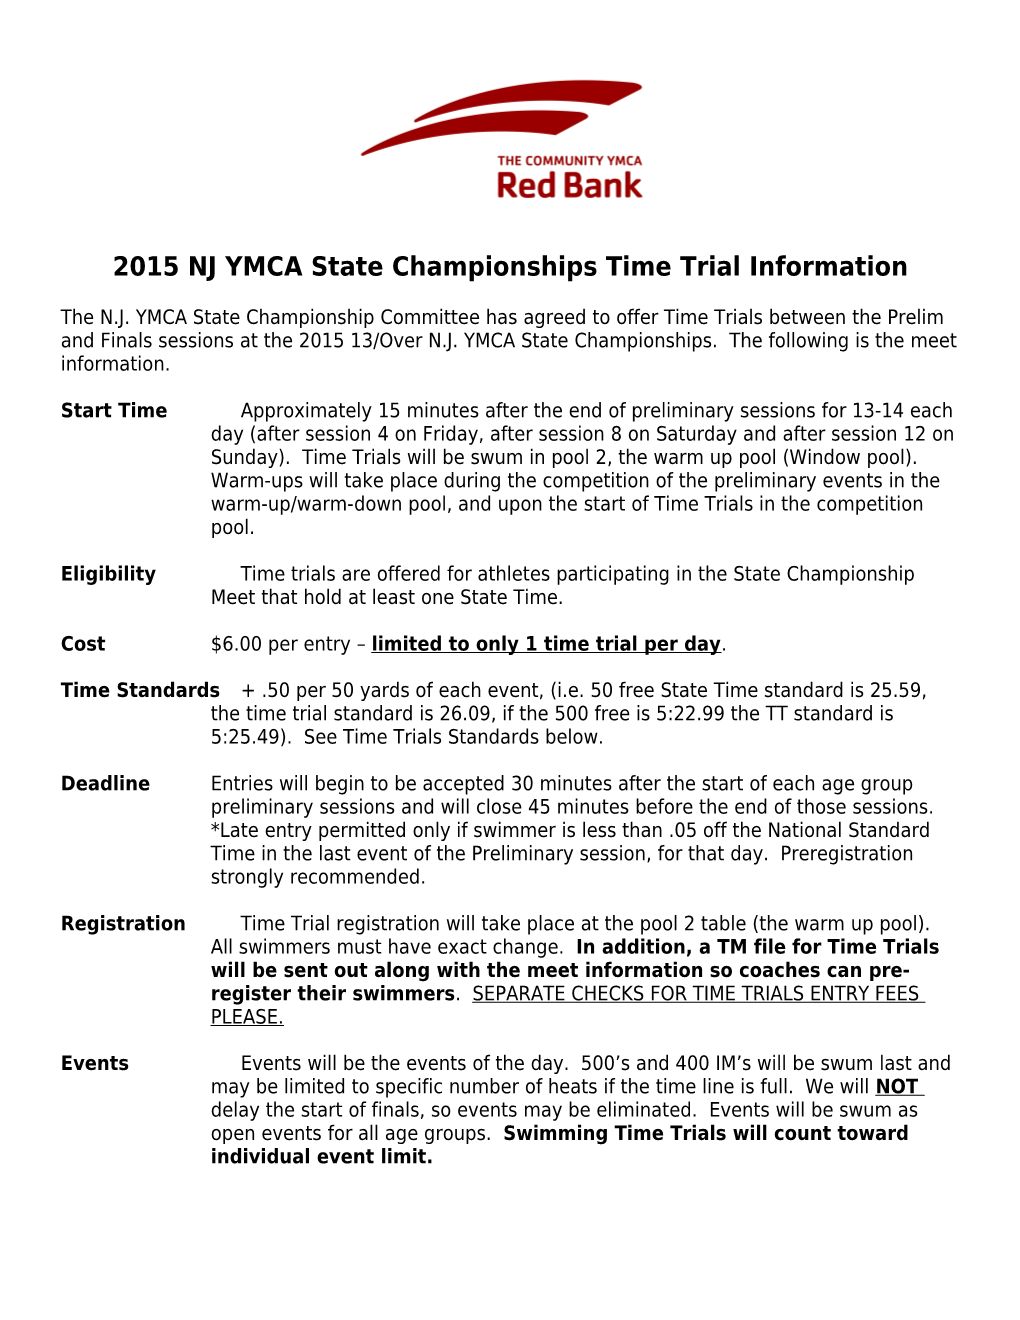 2015 NJ YMCA State Championships Time Trial Information